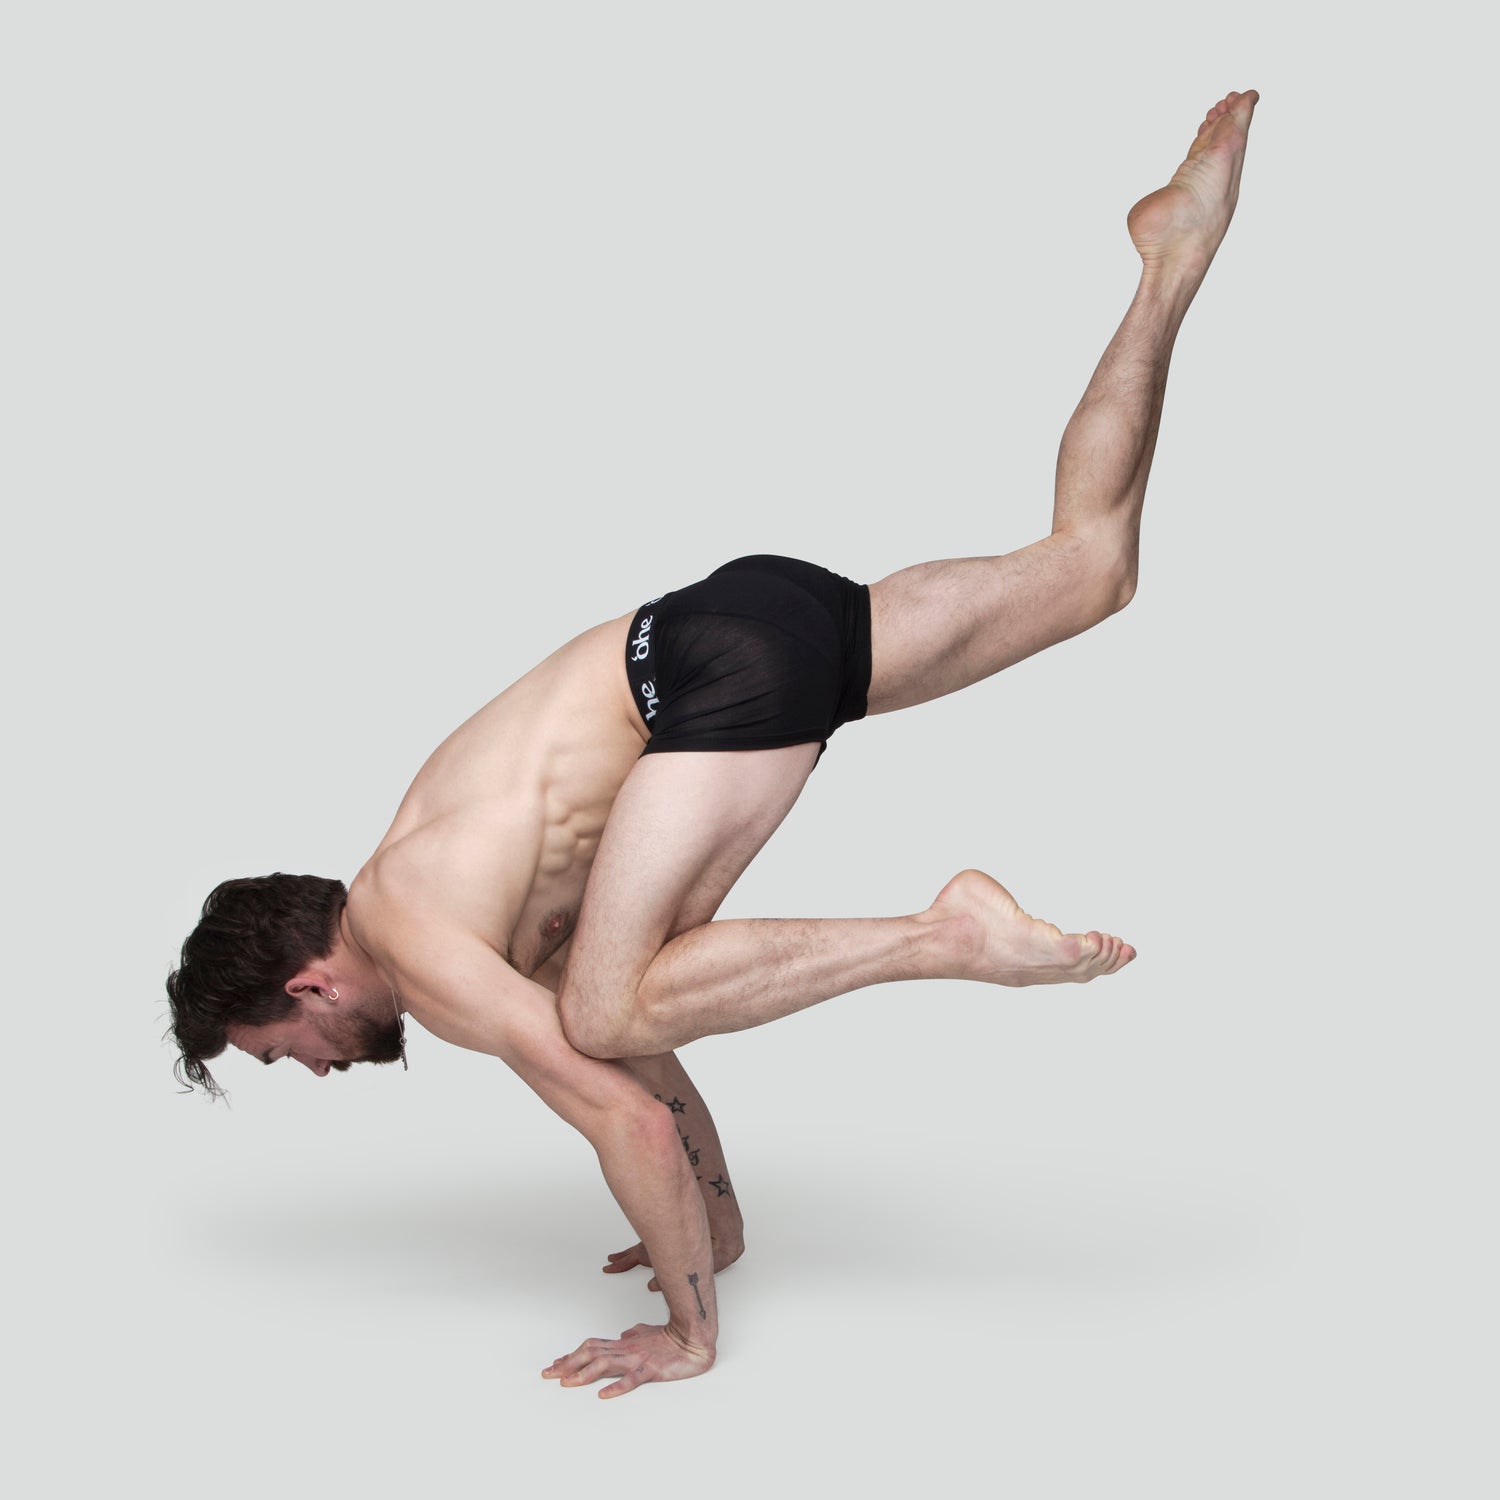 A sporty man doing a yoga pose wearing a pair of charcoal coloured 'ohe underwear